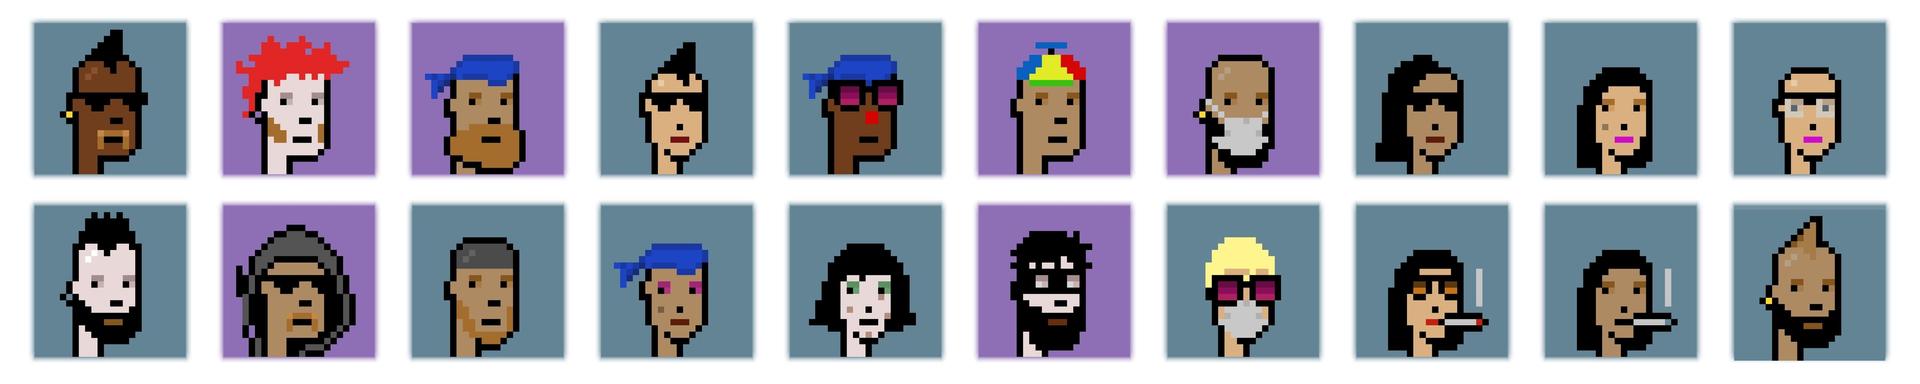 Cryptopunks NFTs in a row